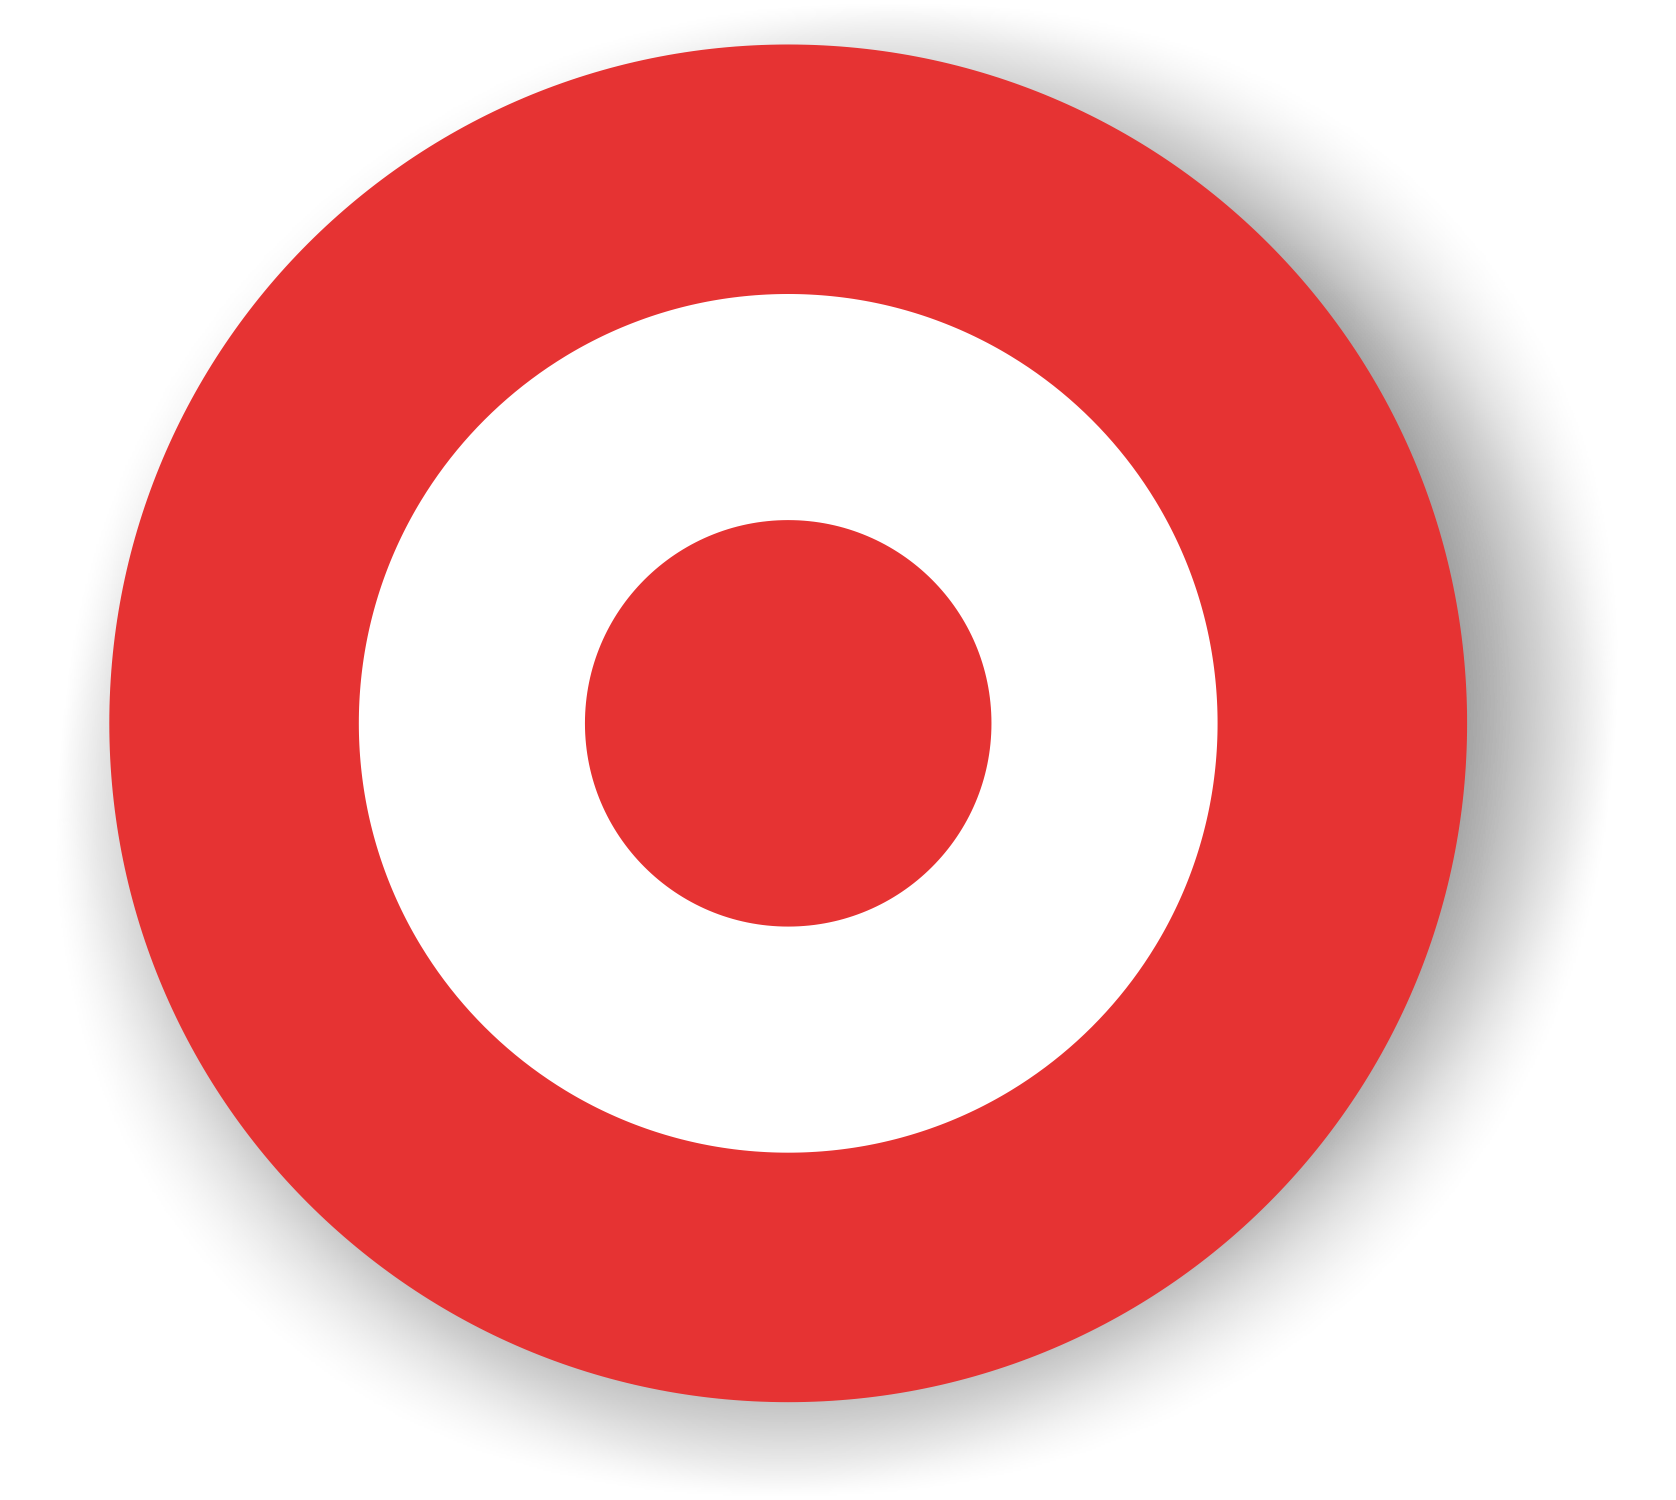 Target to hand over 39 leasehold interests to Walmart - CanEquity Blog